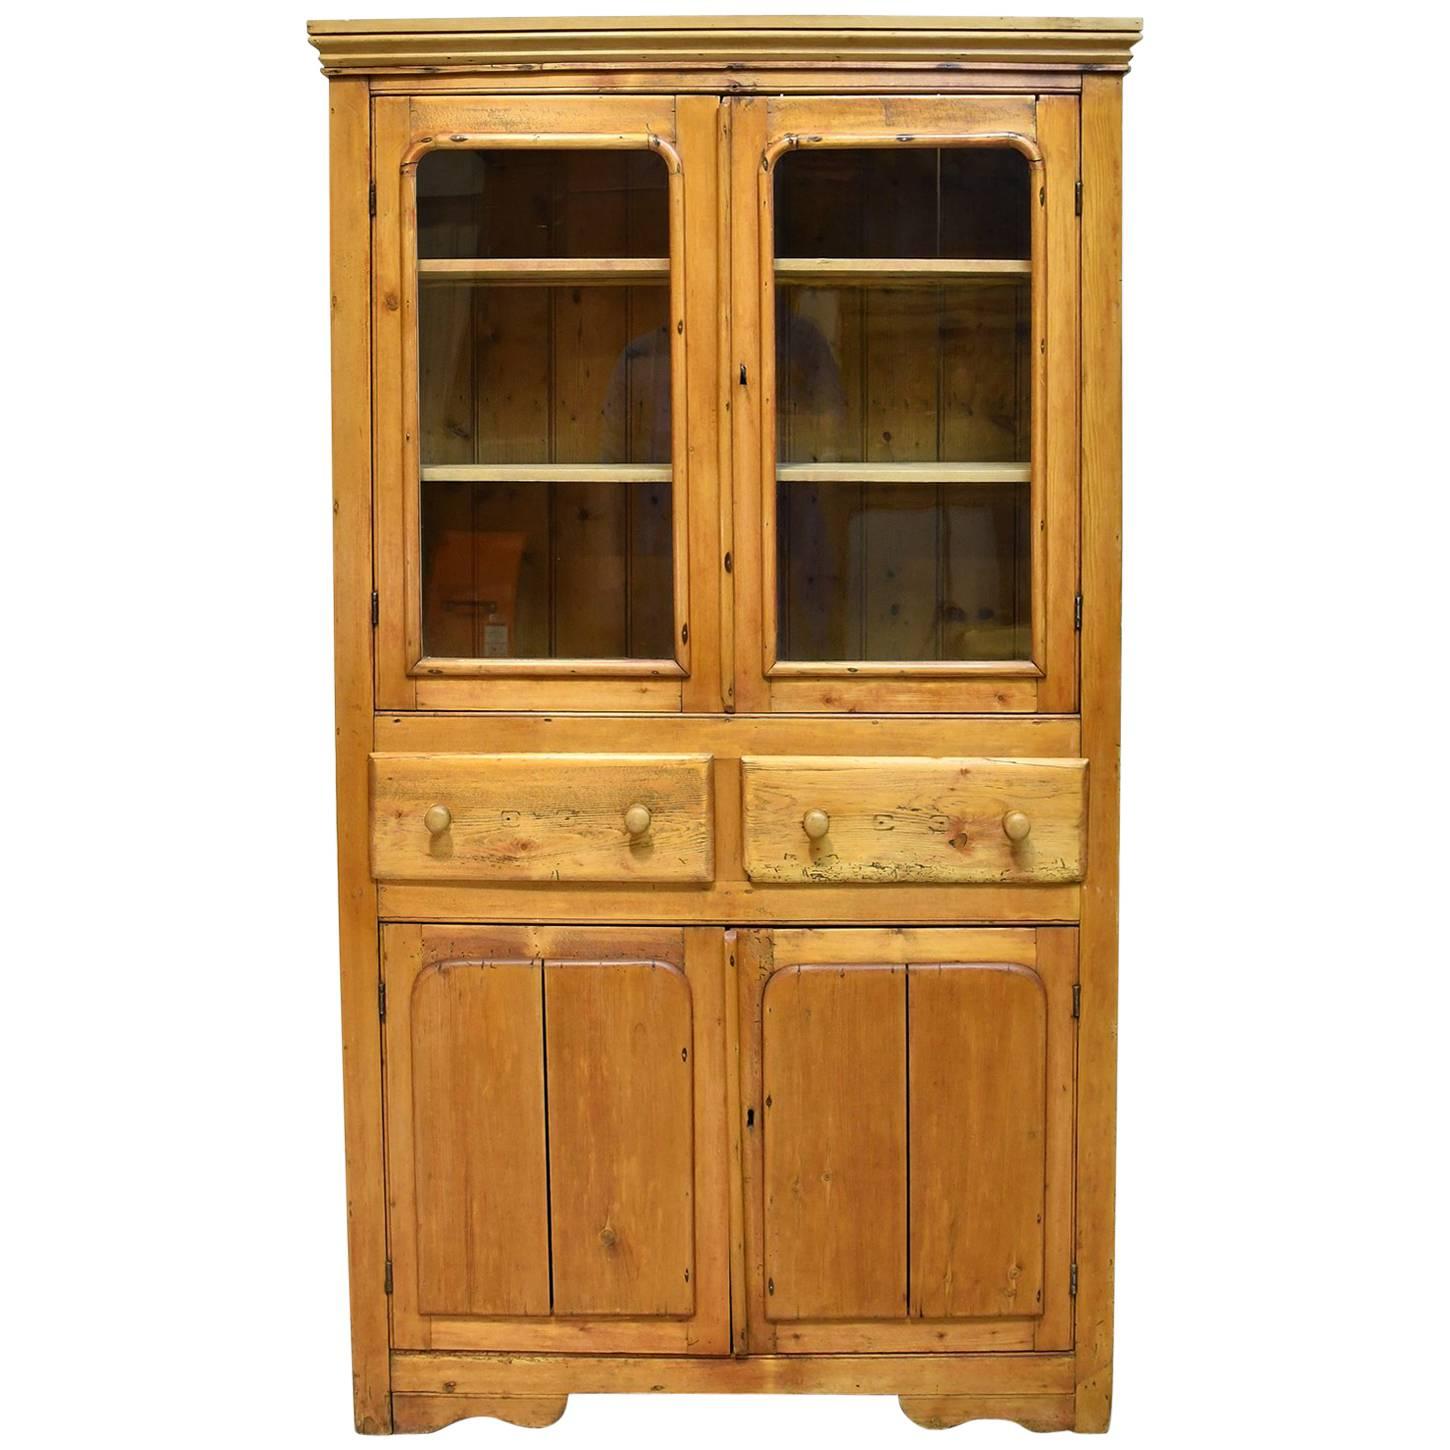 19th Century English or Scottish Shallow Cupboard in Pine w/ Glass Doors